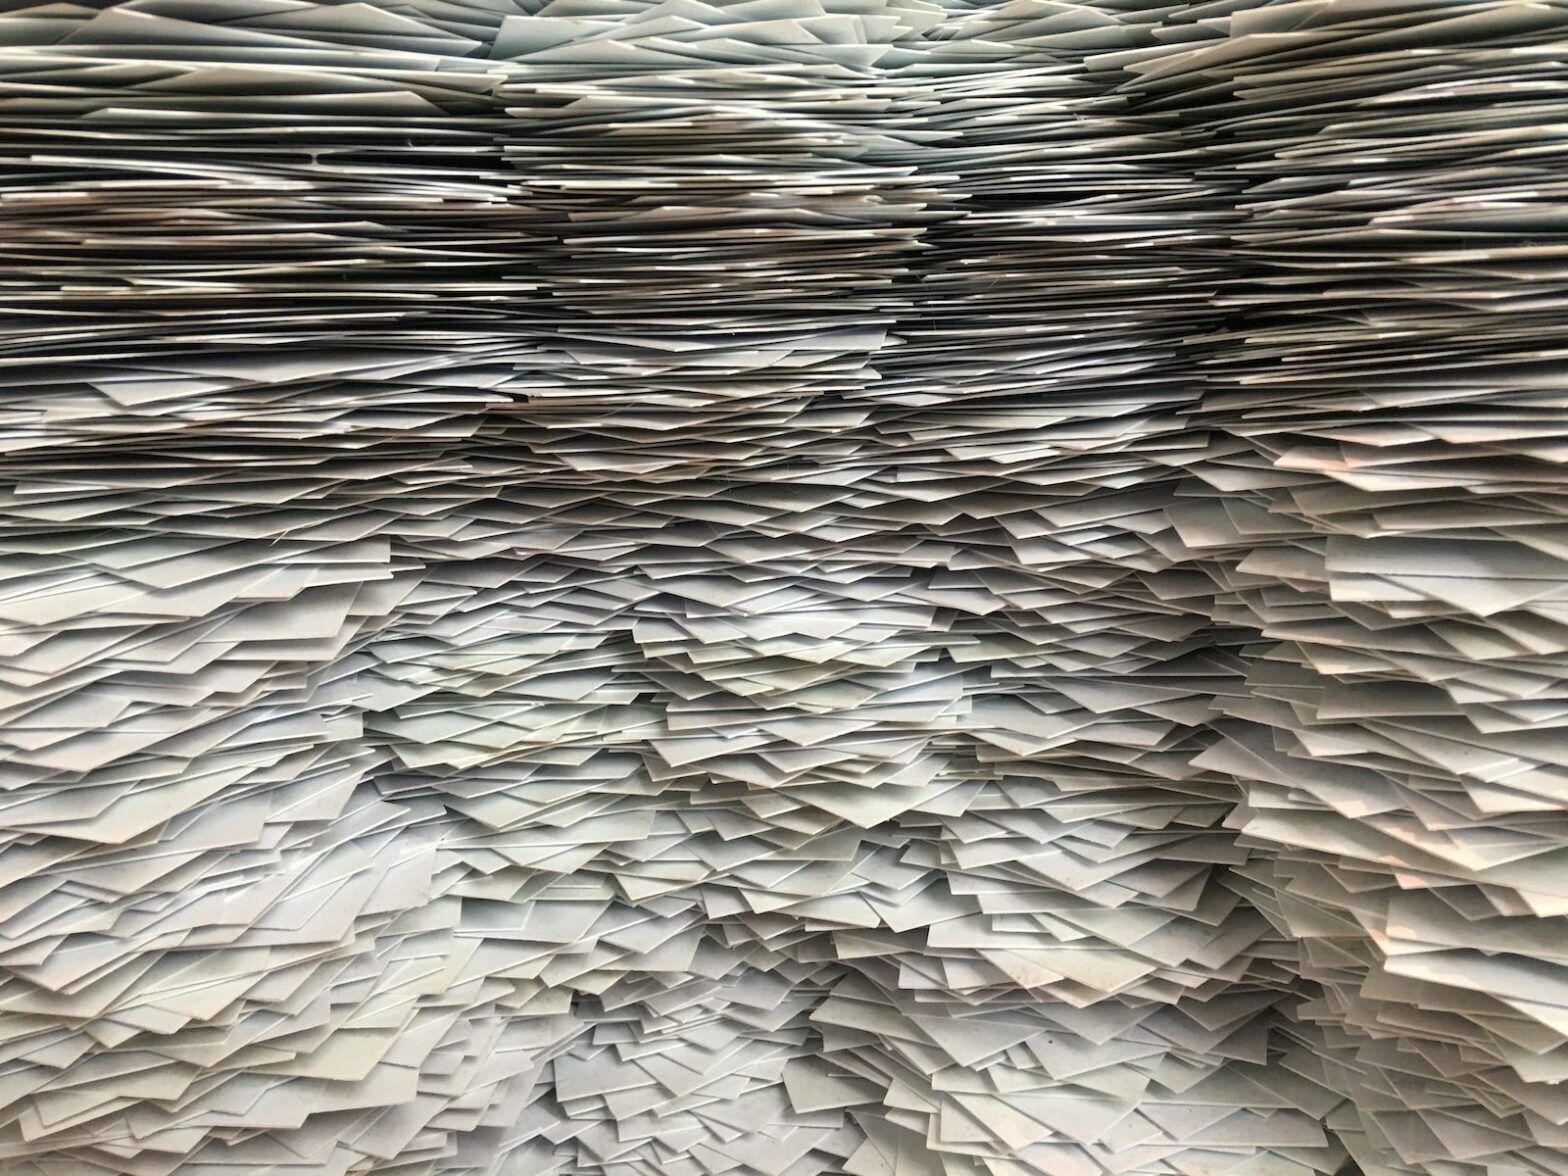 endless stacks of paper